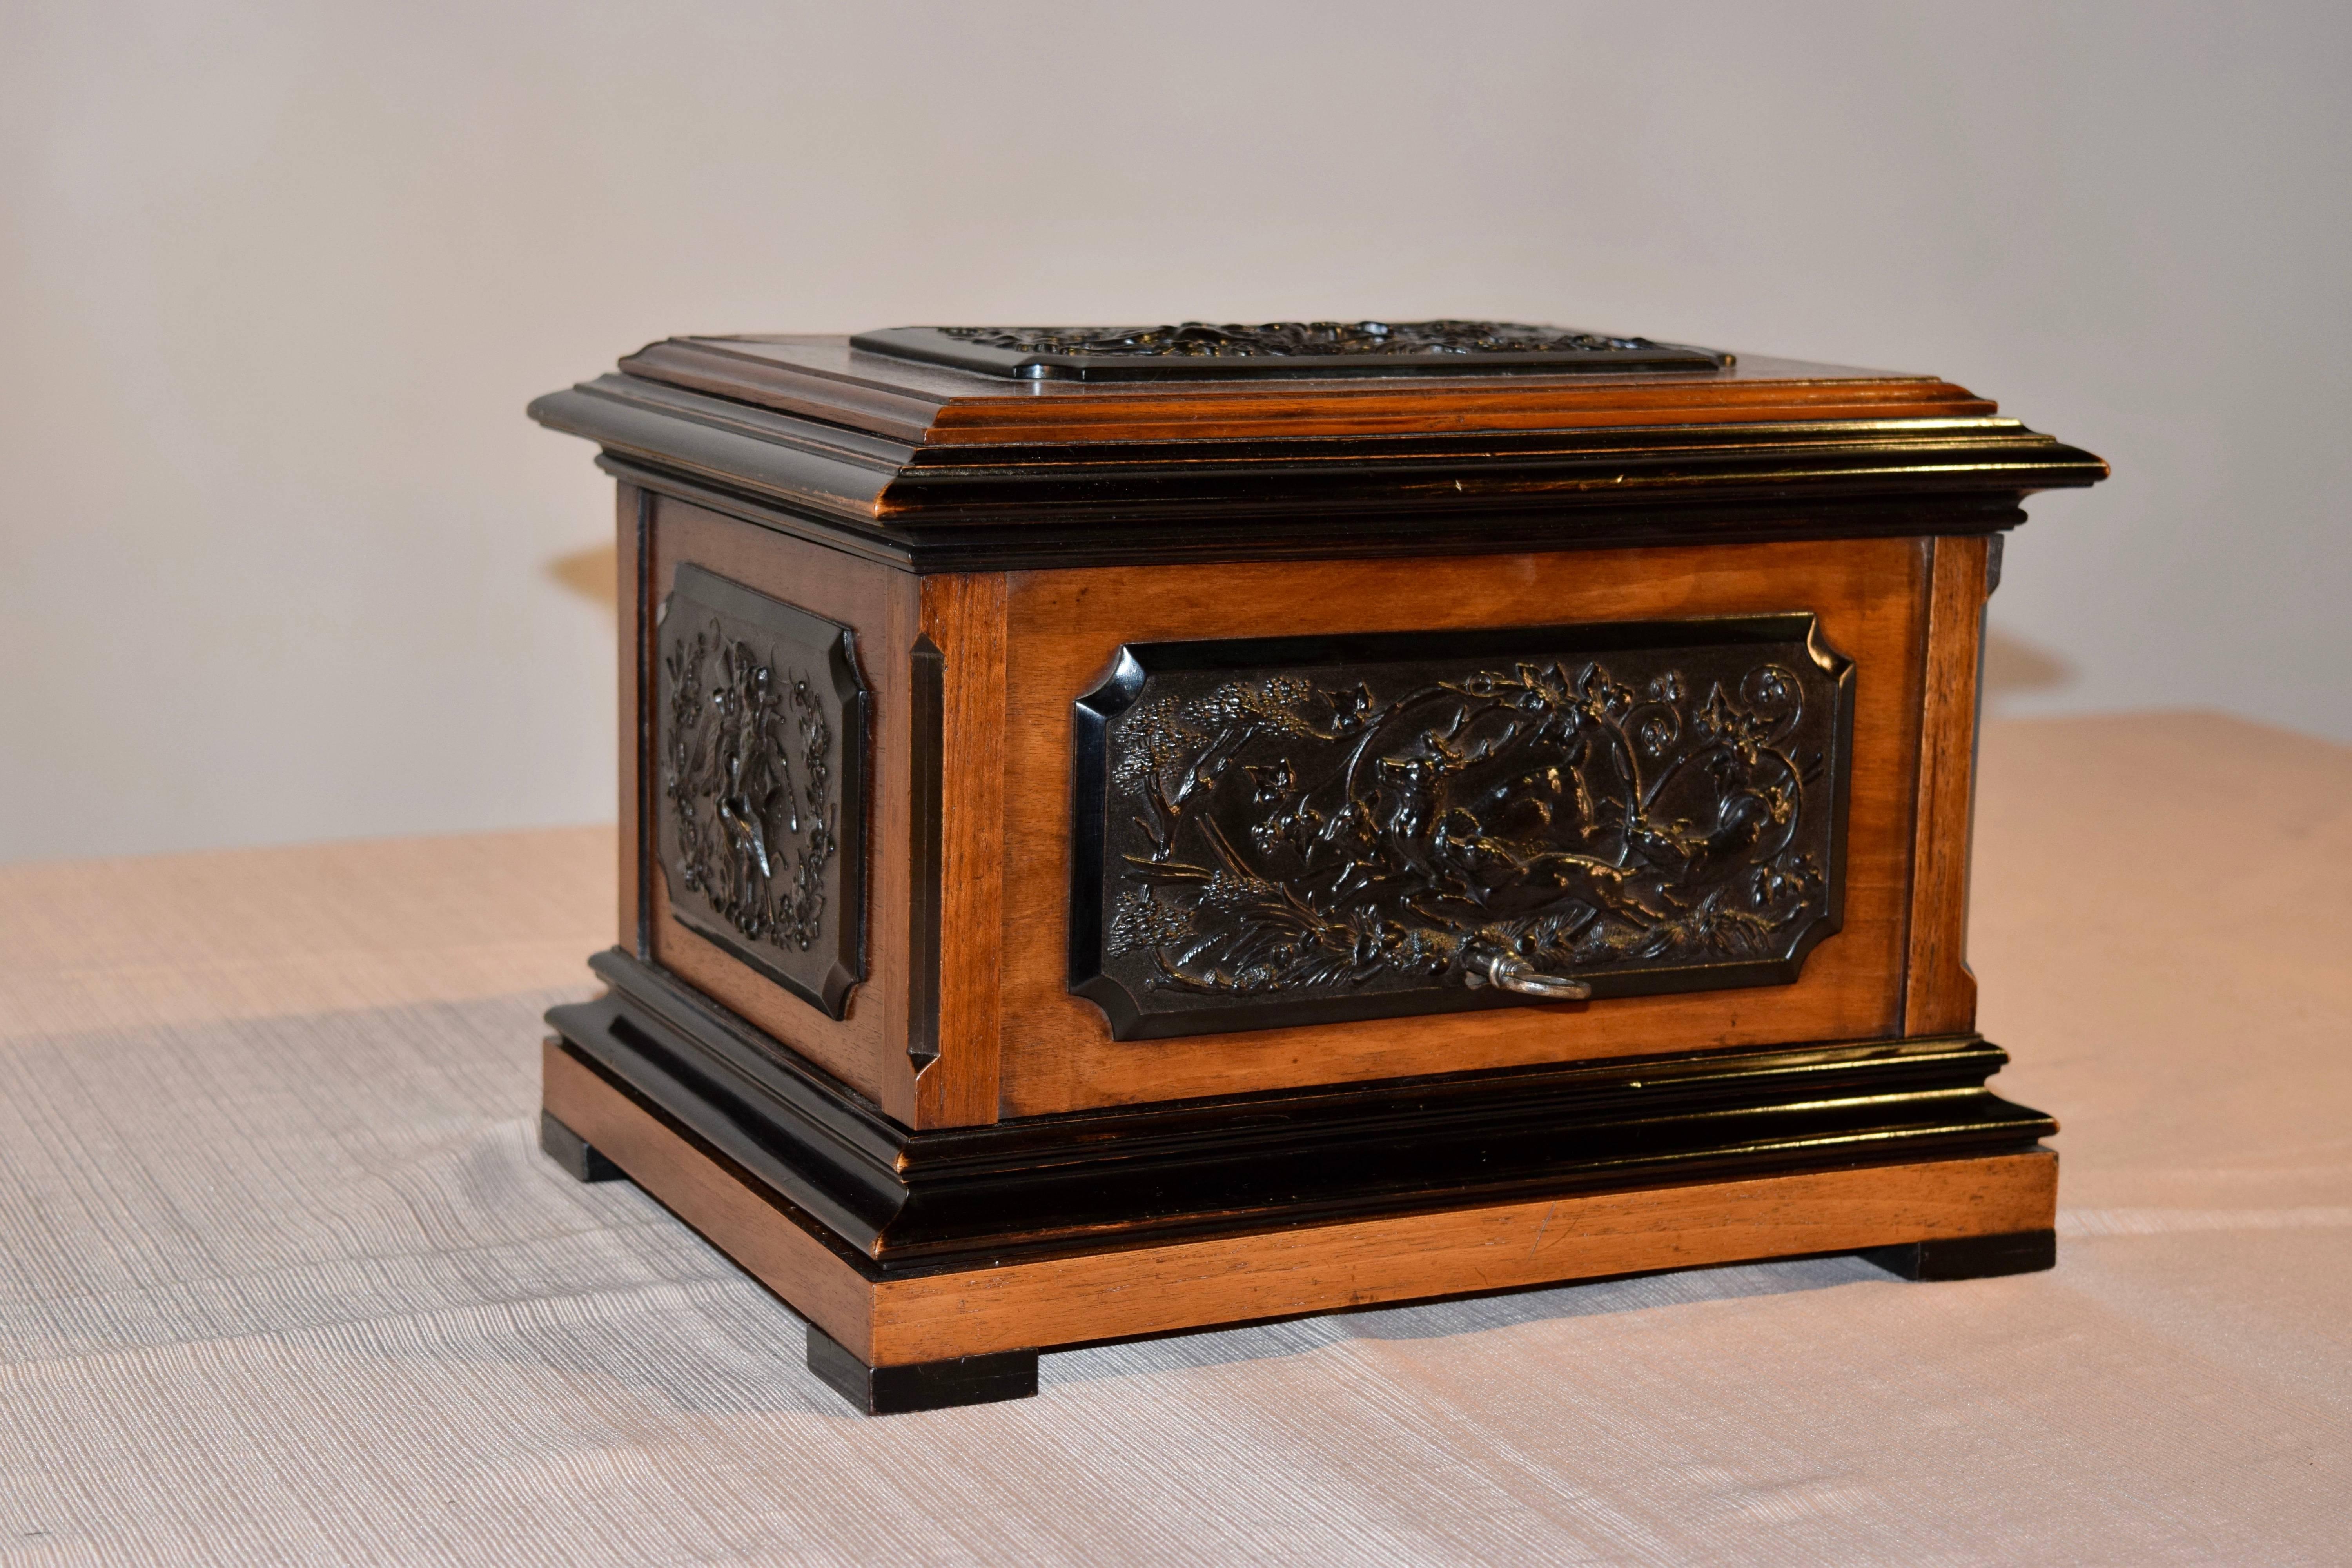 19th century mahogany cigar humidor from France. The top has a raised central plateau with a highly molded edge, which is ebonized for contrast. The top and sides have applied plaques in gutta percha depicting hunting scenes, which are in excellent